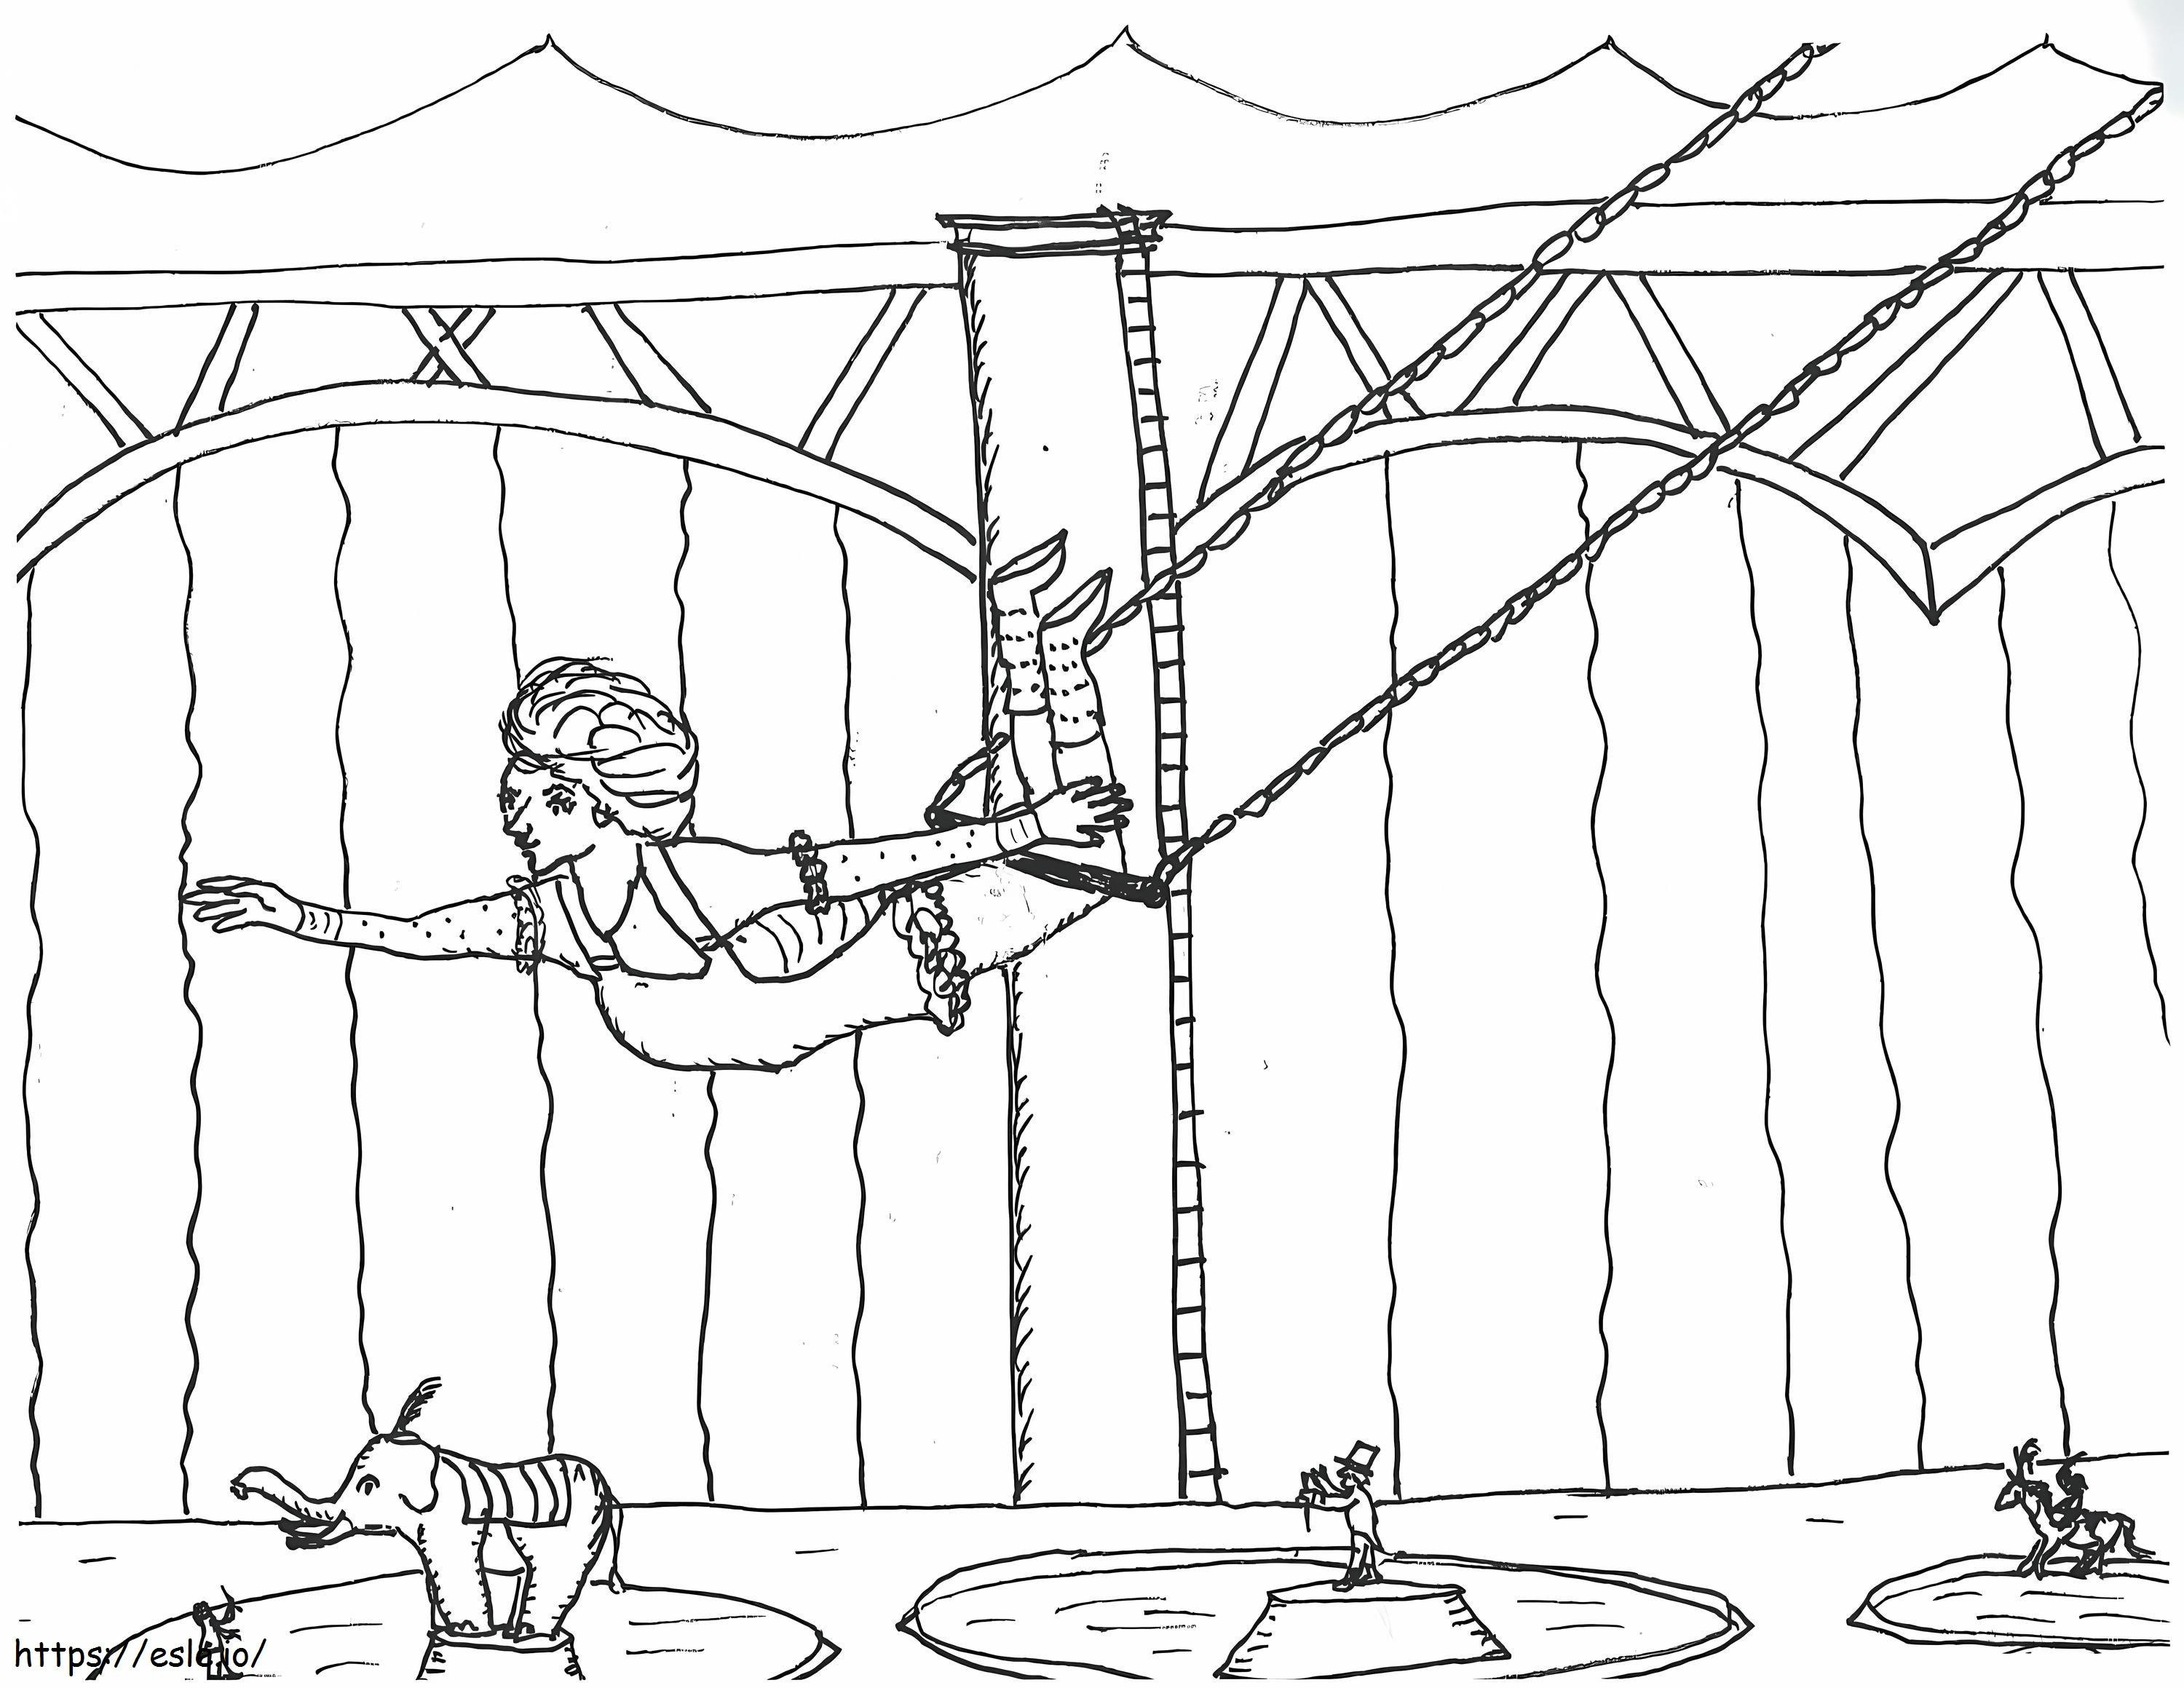 The Greatest Showman 4 coloring page